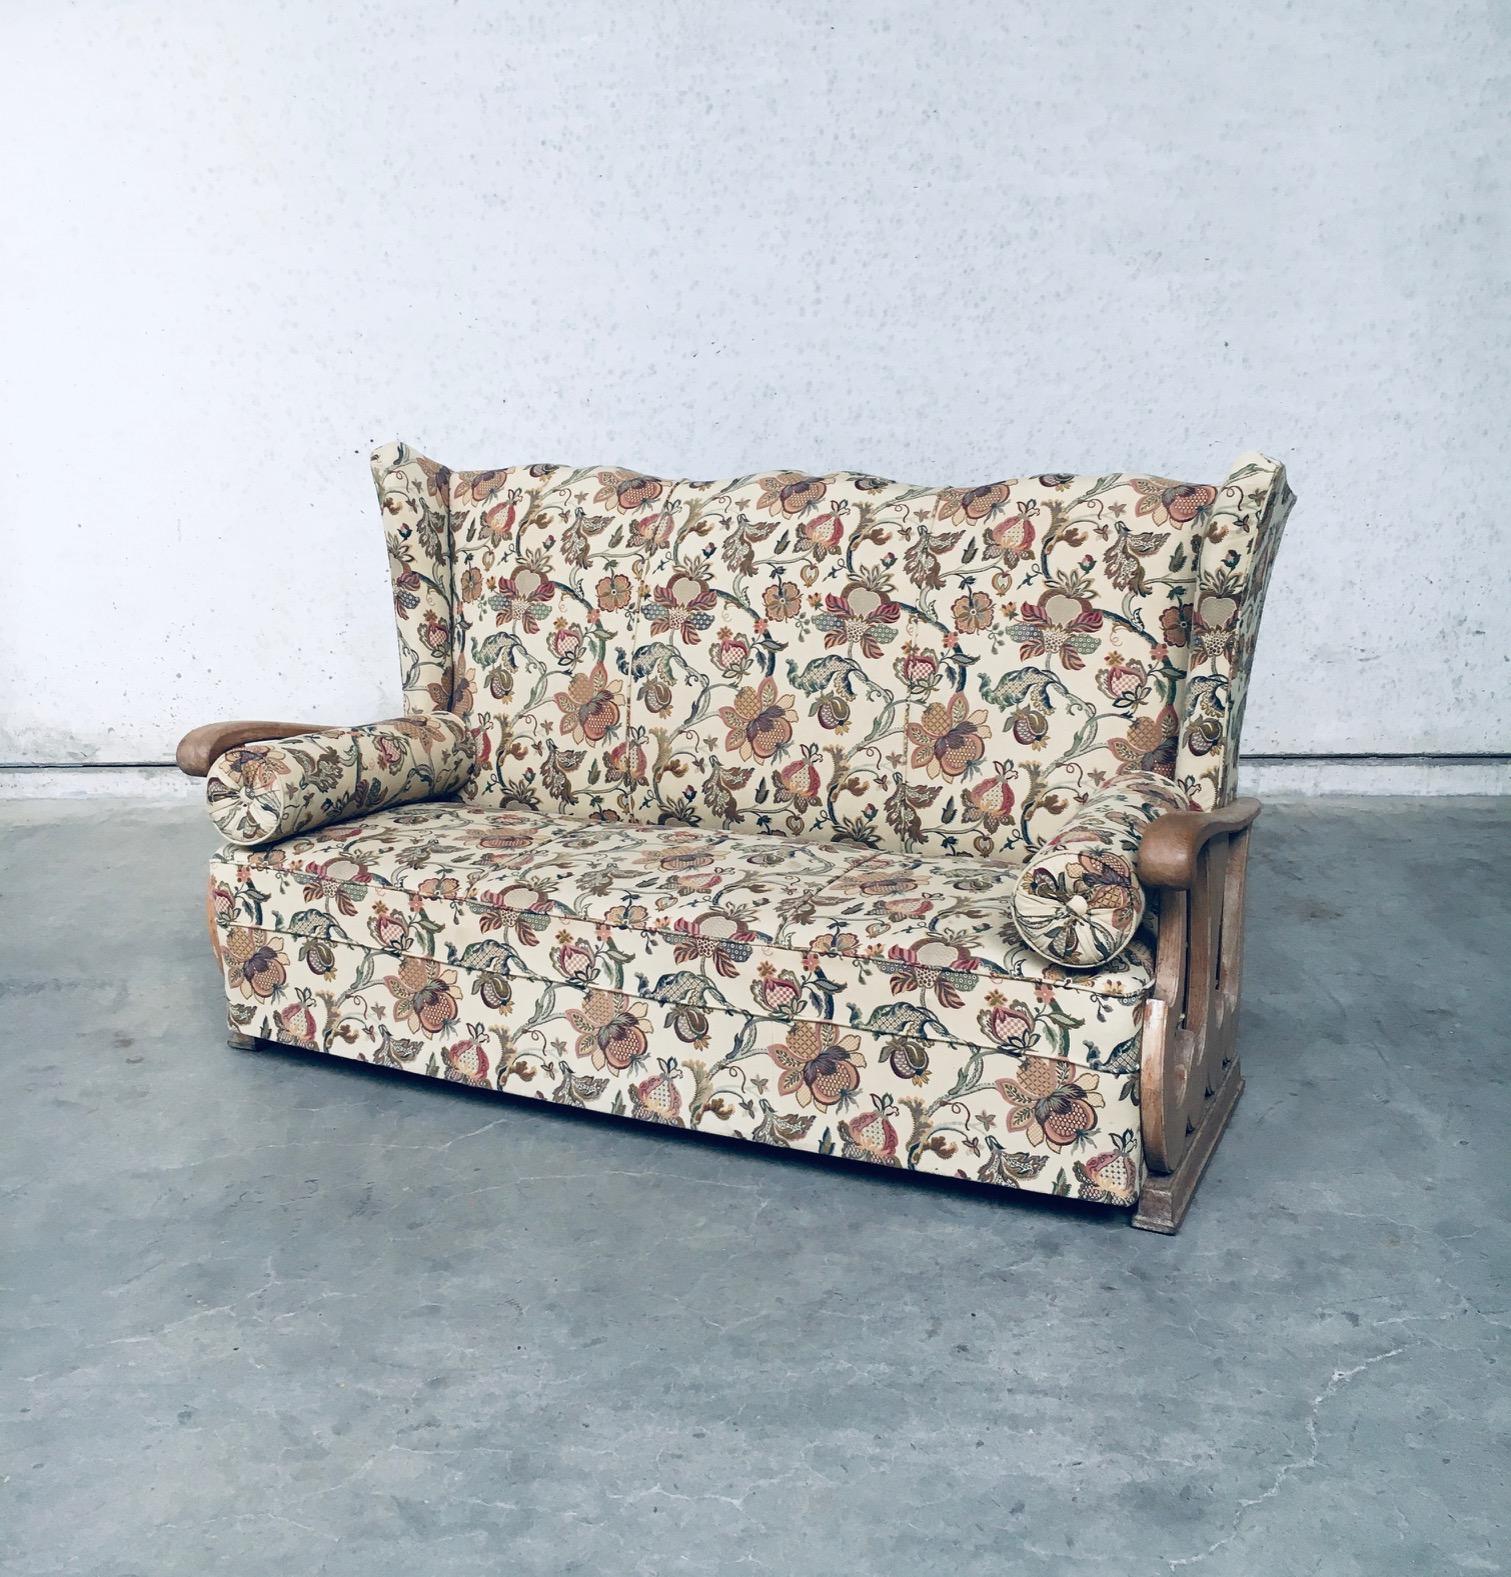 Original early 1900's design high wing back 3 seat sofa. Made in France, 1920's - 1930's. High wing back sofa with oak sculptural carved arm rests and recently reupholstered flower print fabric. This comes from the first owner who lived in a small